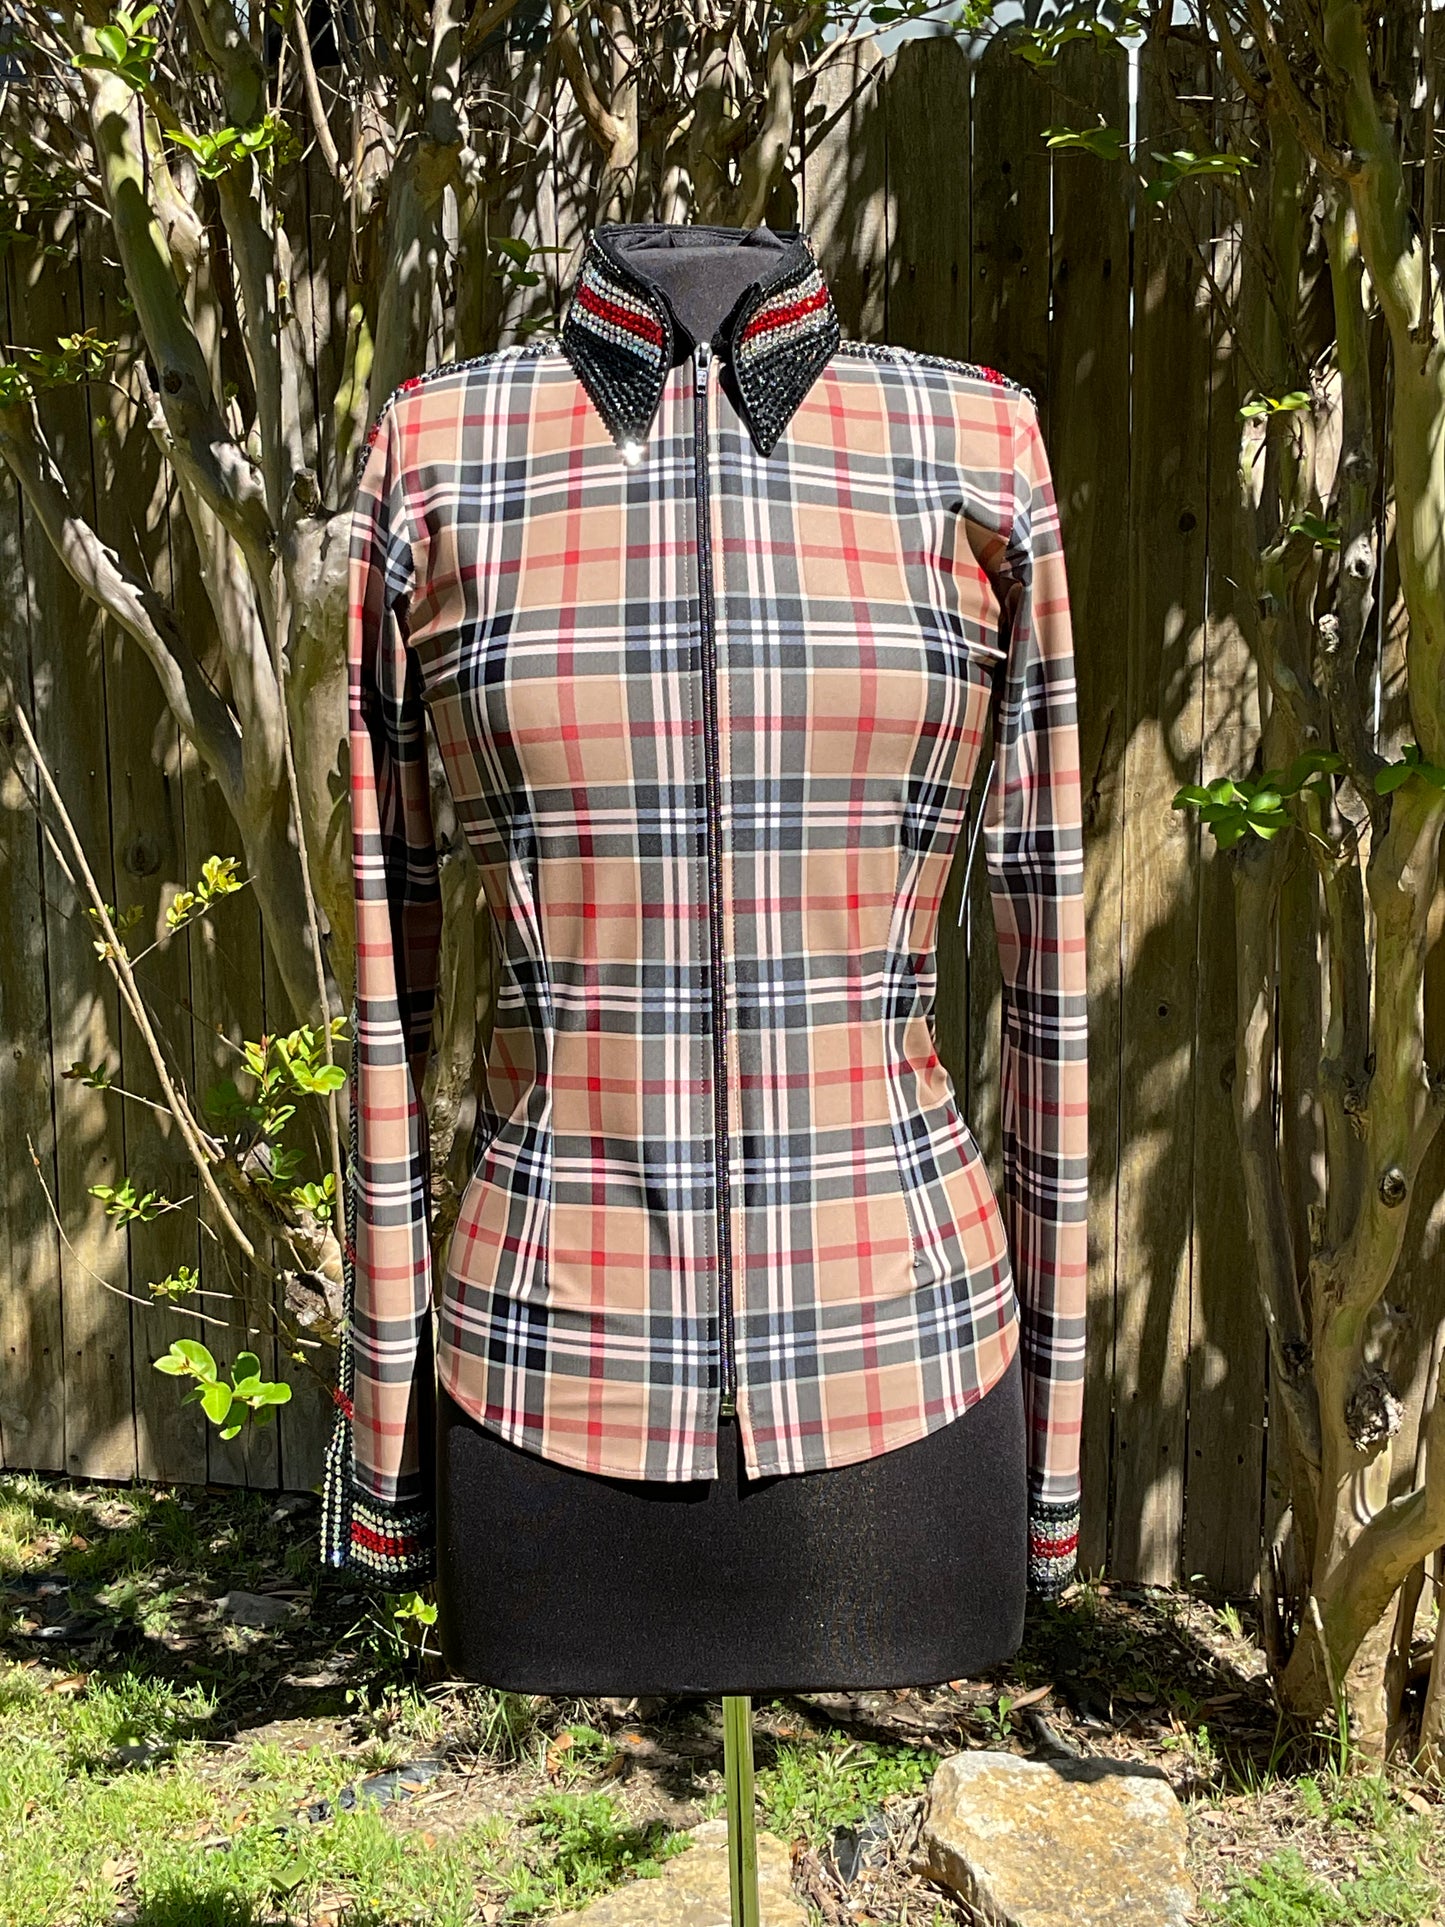 Size medium stretch Tan and Black Plaid taffeta with silver and red